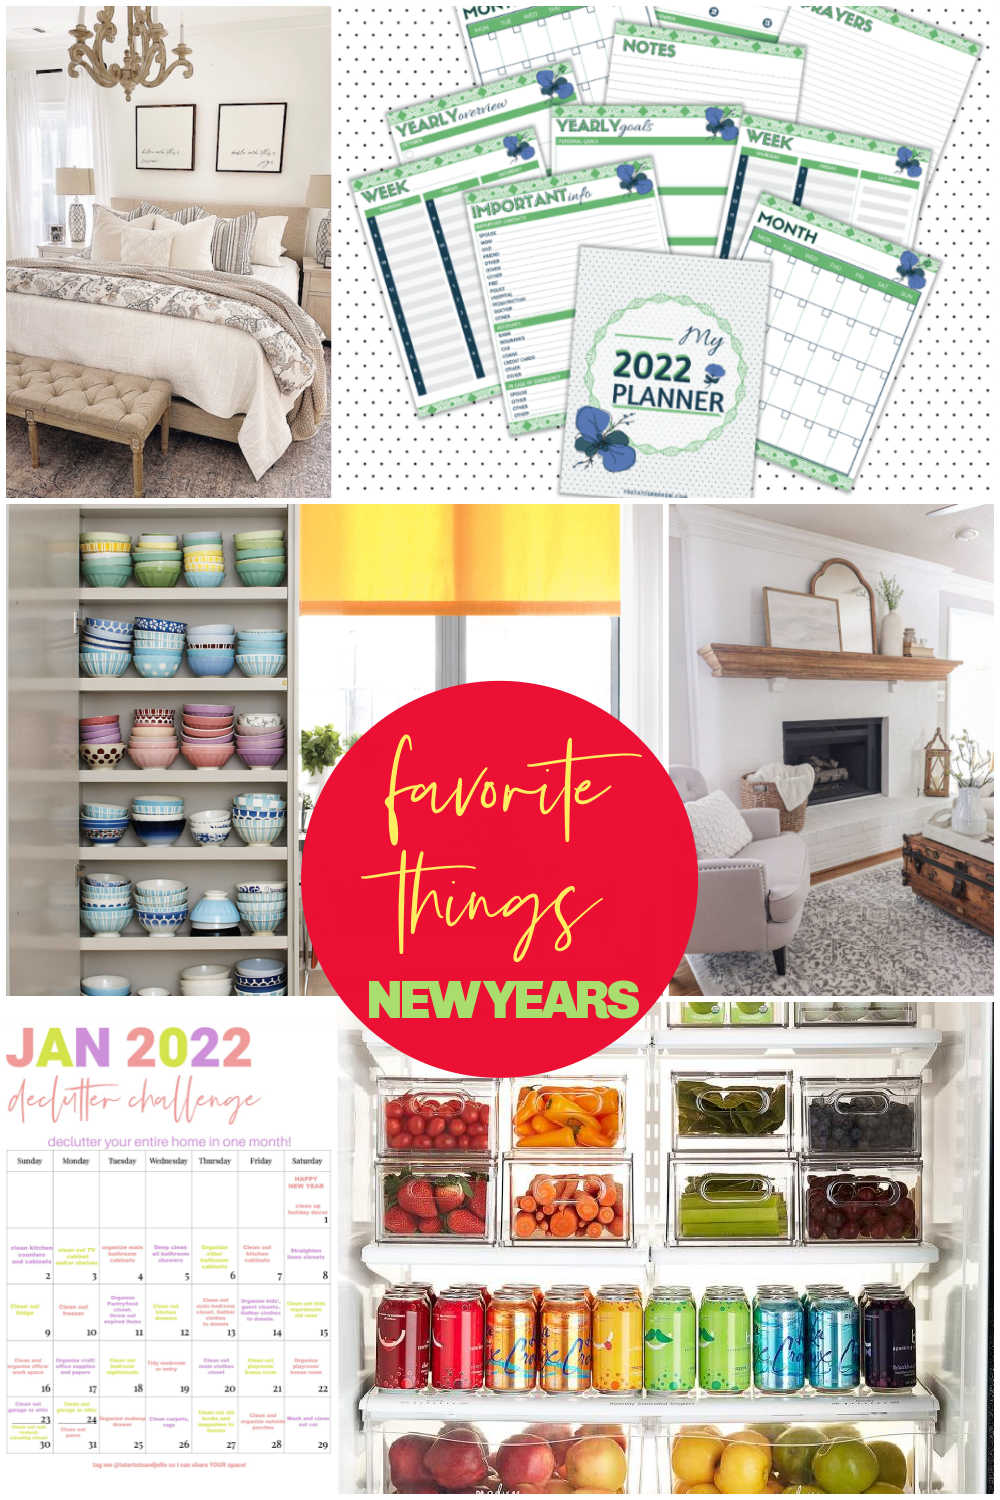 Welcome Home Saturday - Happy New Year! Organizing, Decluttering and some new DIY projects to make in the new year.